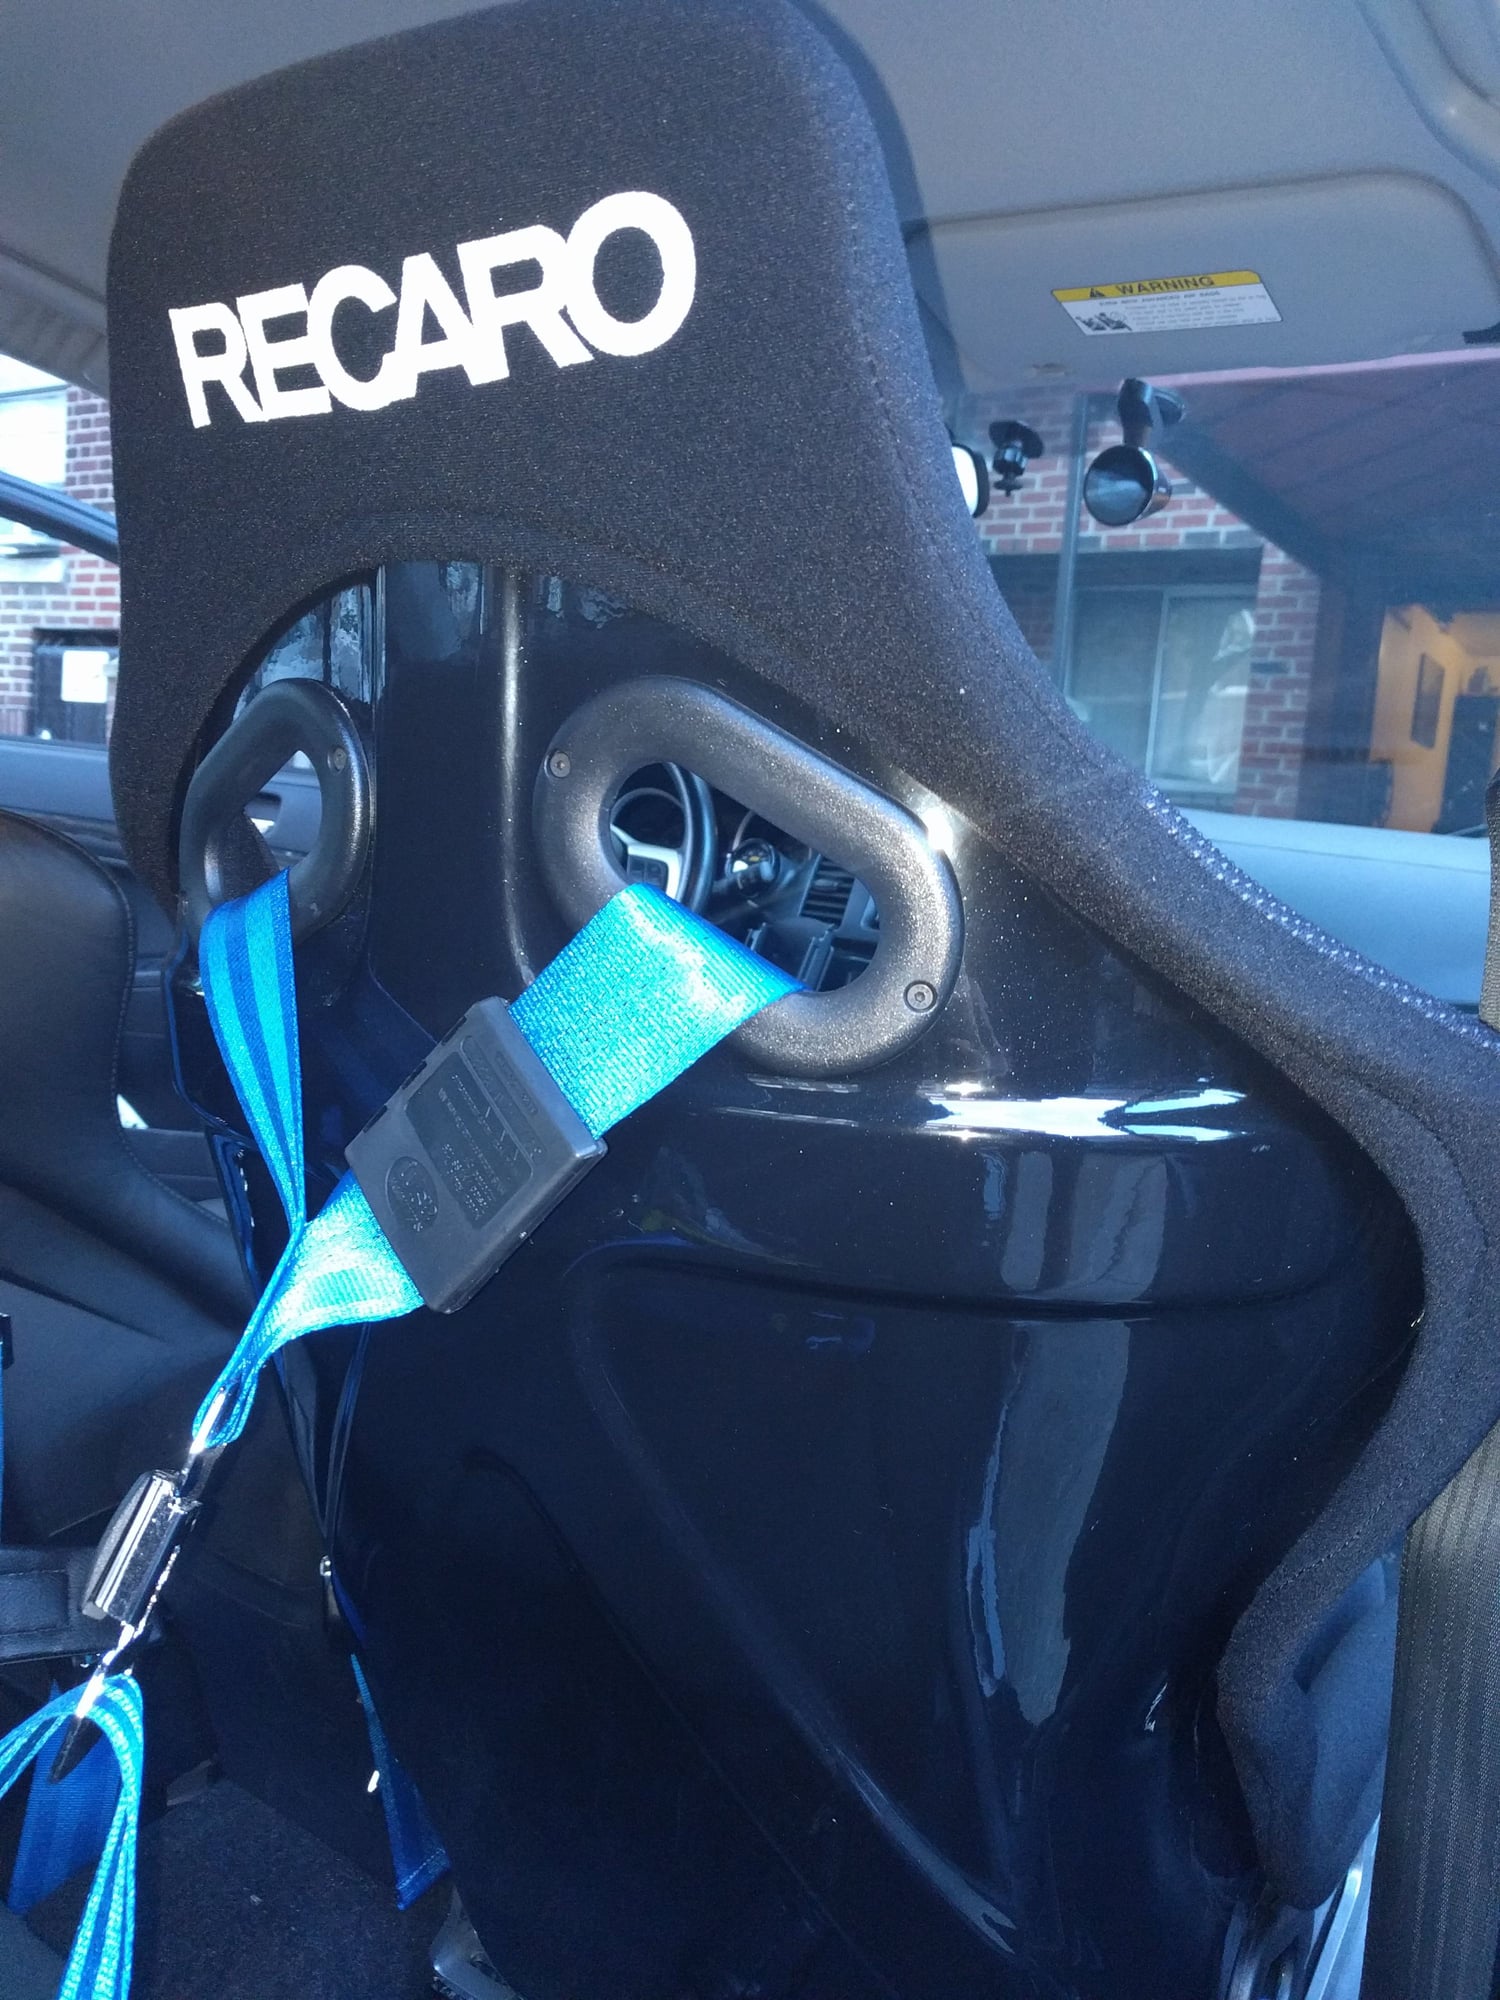 Interior/Upholstery - 2018 Recaro Profi SPG Seat for Sale - (sat in for a total of 3 hours) - Used - All Years Any Make All Models - New York, NY 11104, United States